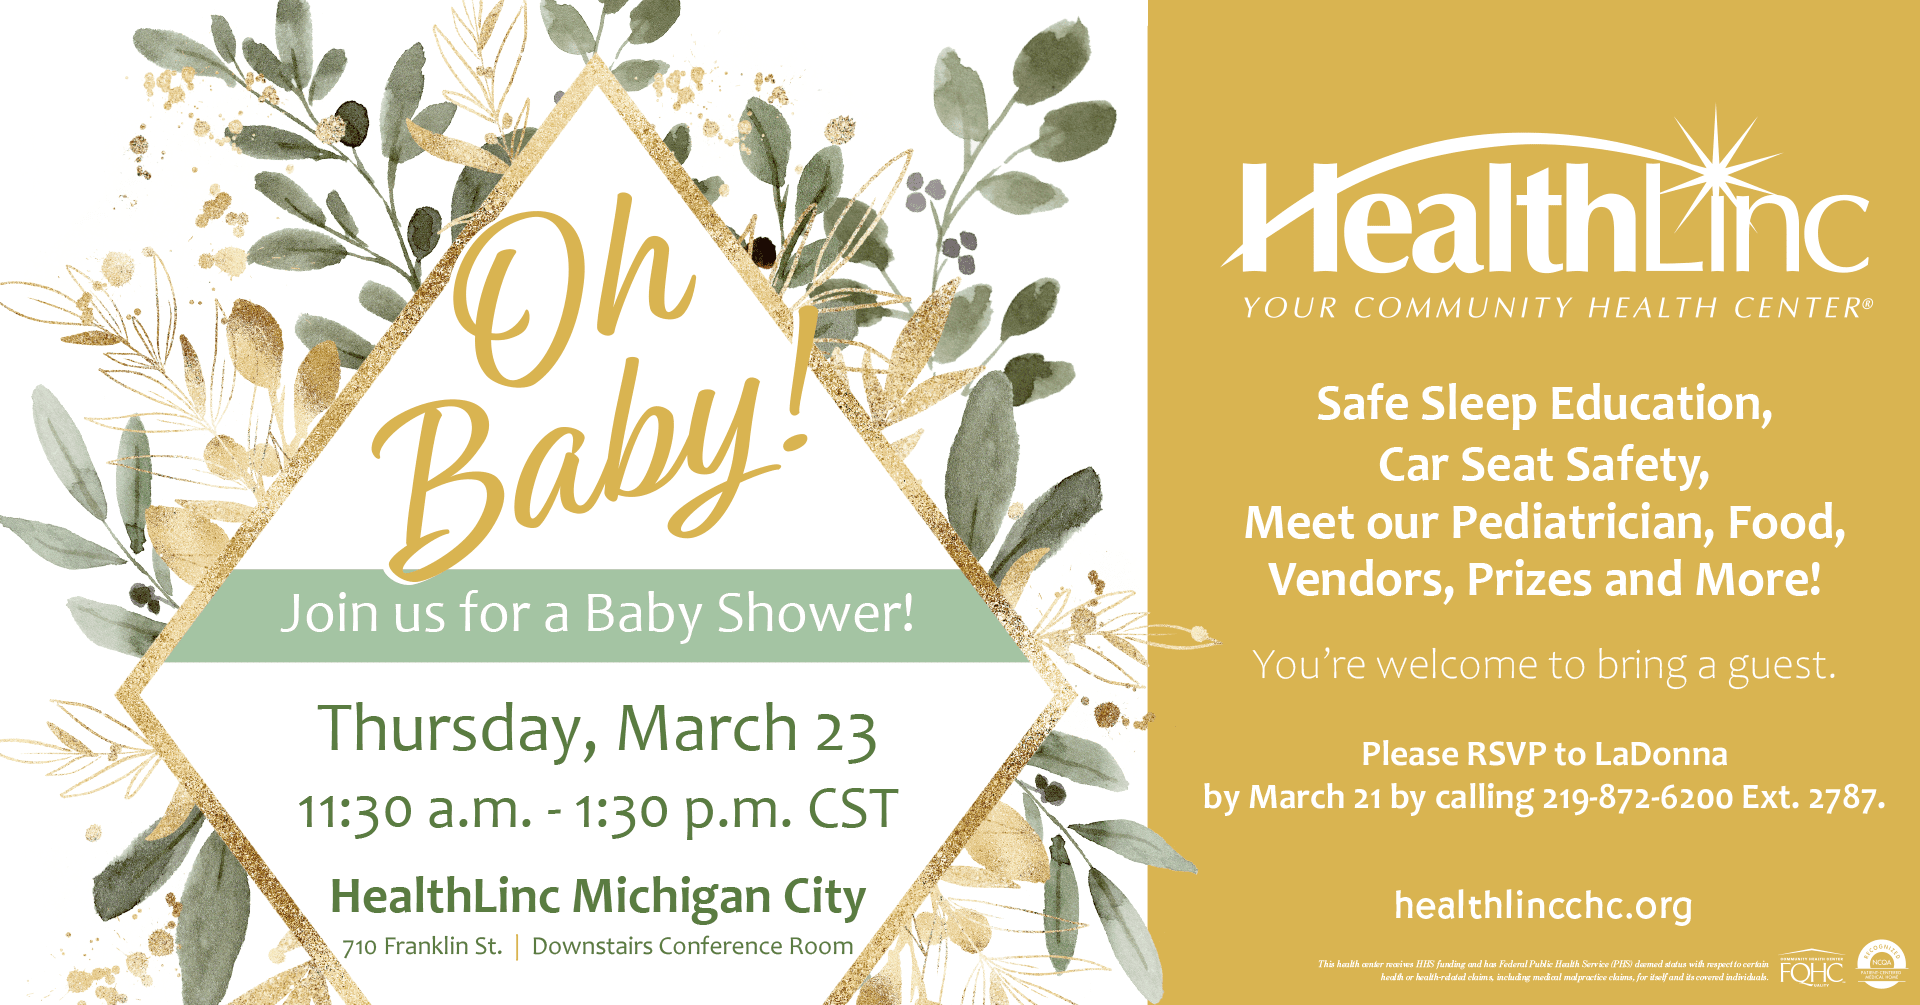 A banner for the baby shower at HealthLinc Michigan City at 710 Franklin St. being held on March 23 from 11:30 to 1:30 p.m. CST.